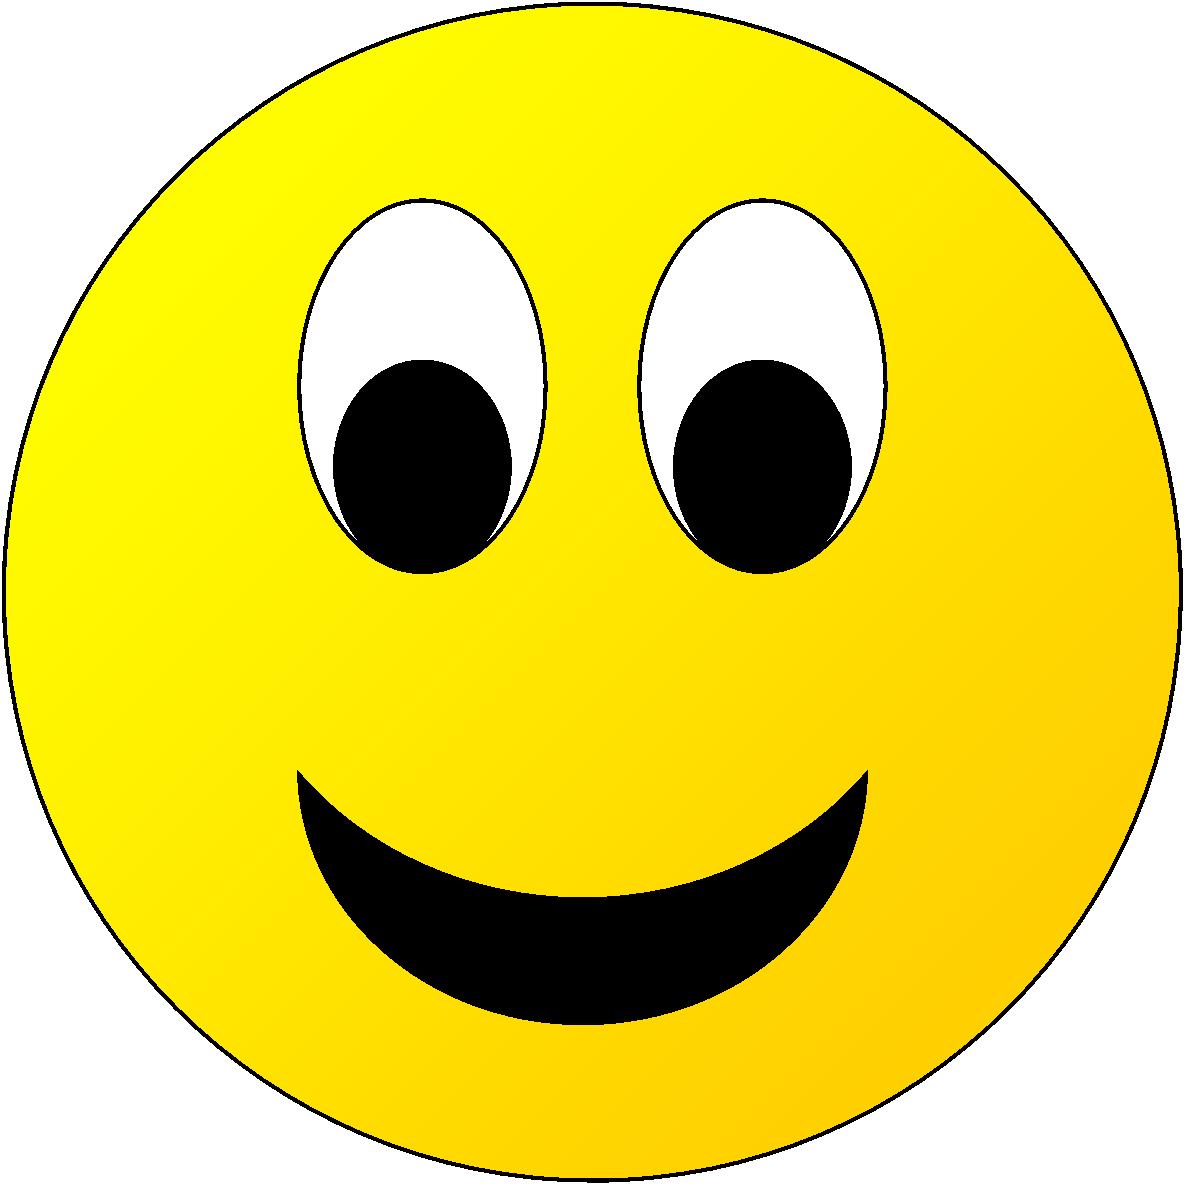 Laughing Smiley Clip Art - ClipArt Best